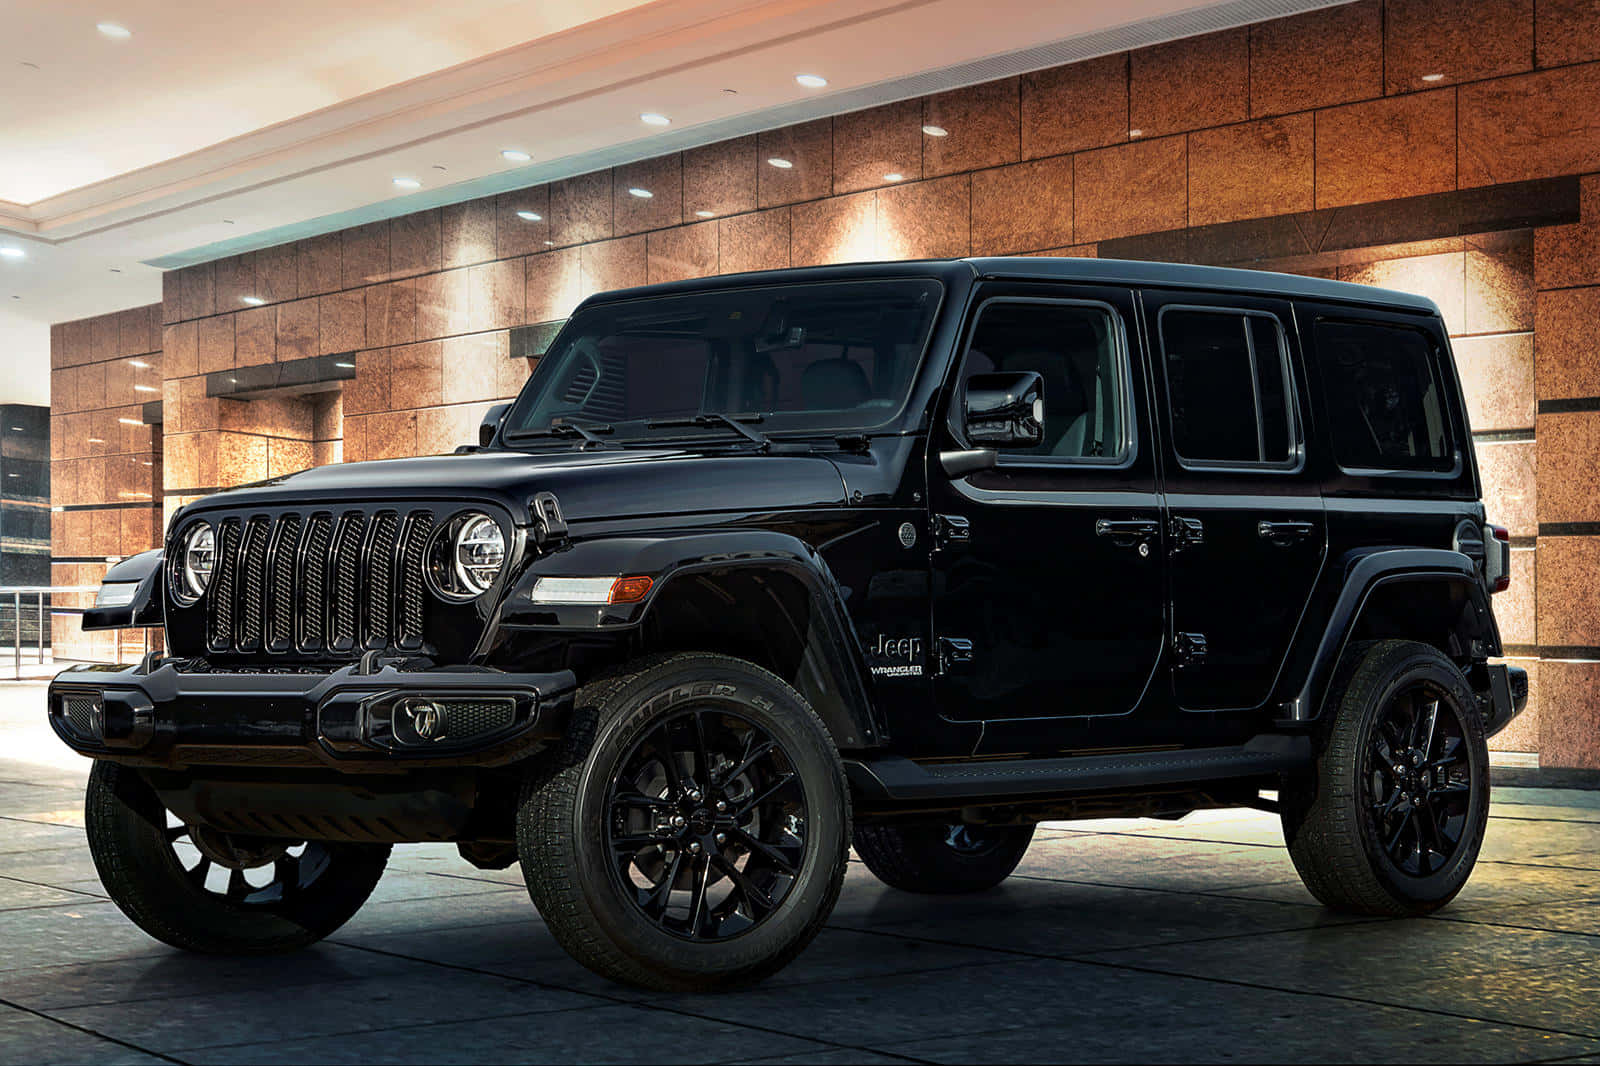 Get Ready to Hit the Trails in a Head-Turning Black Jeep